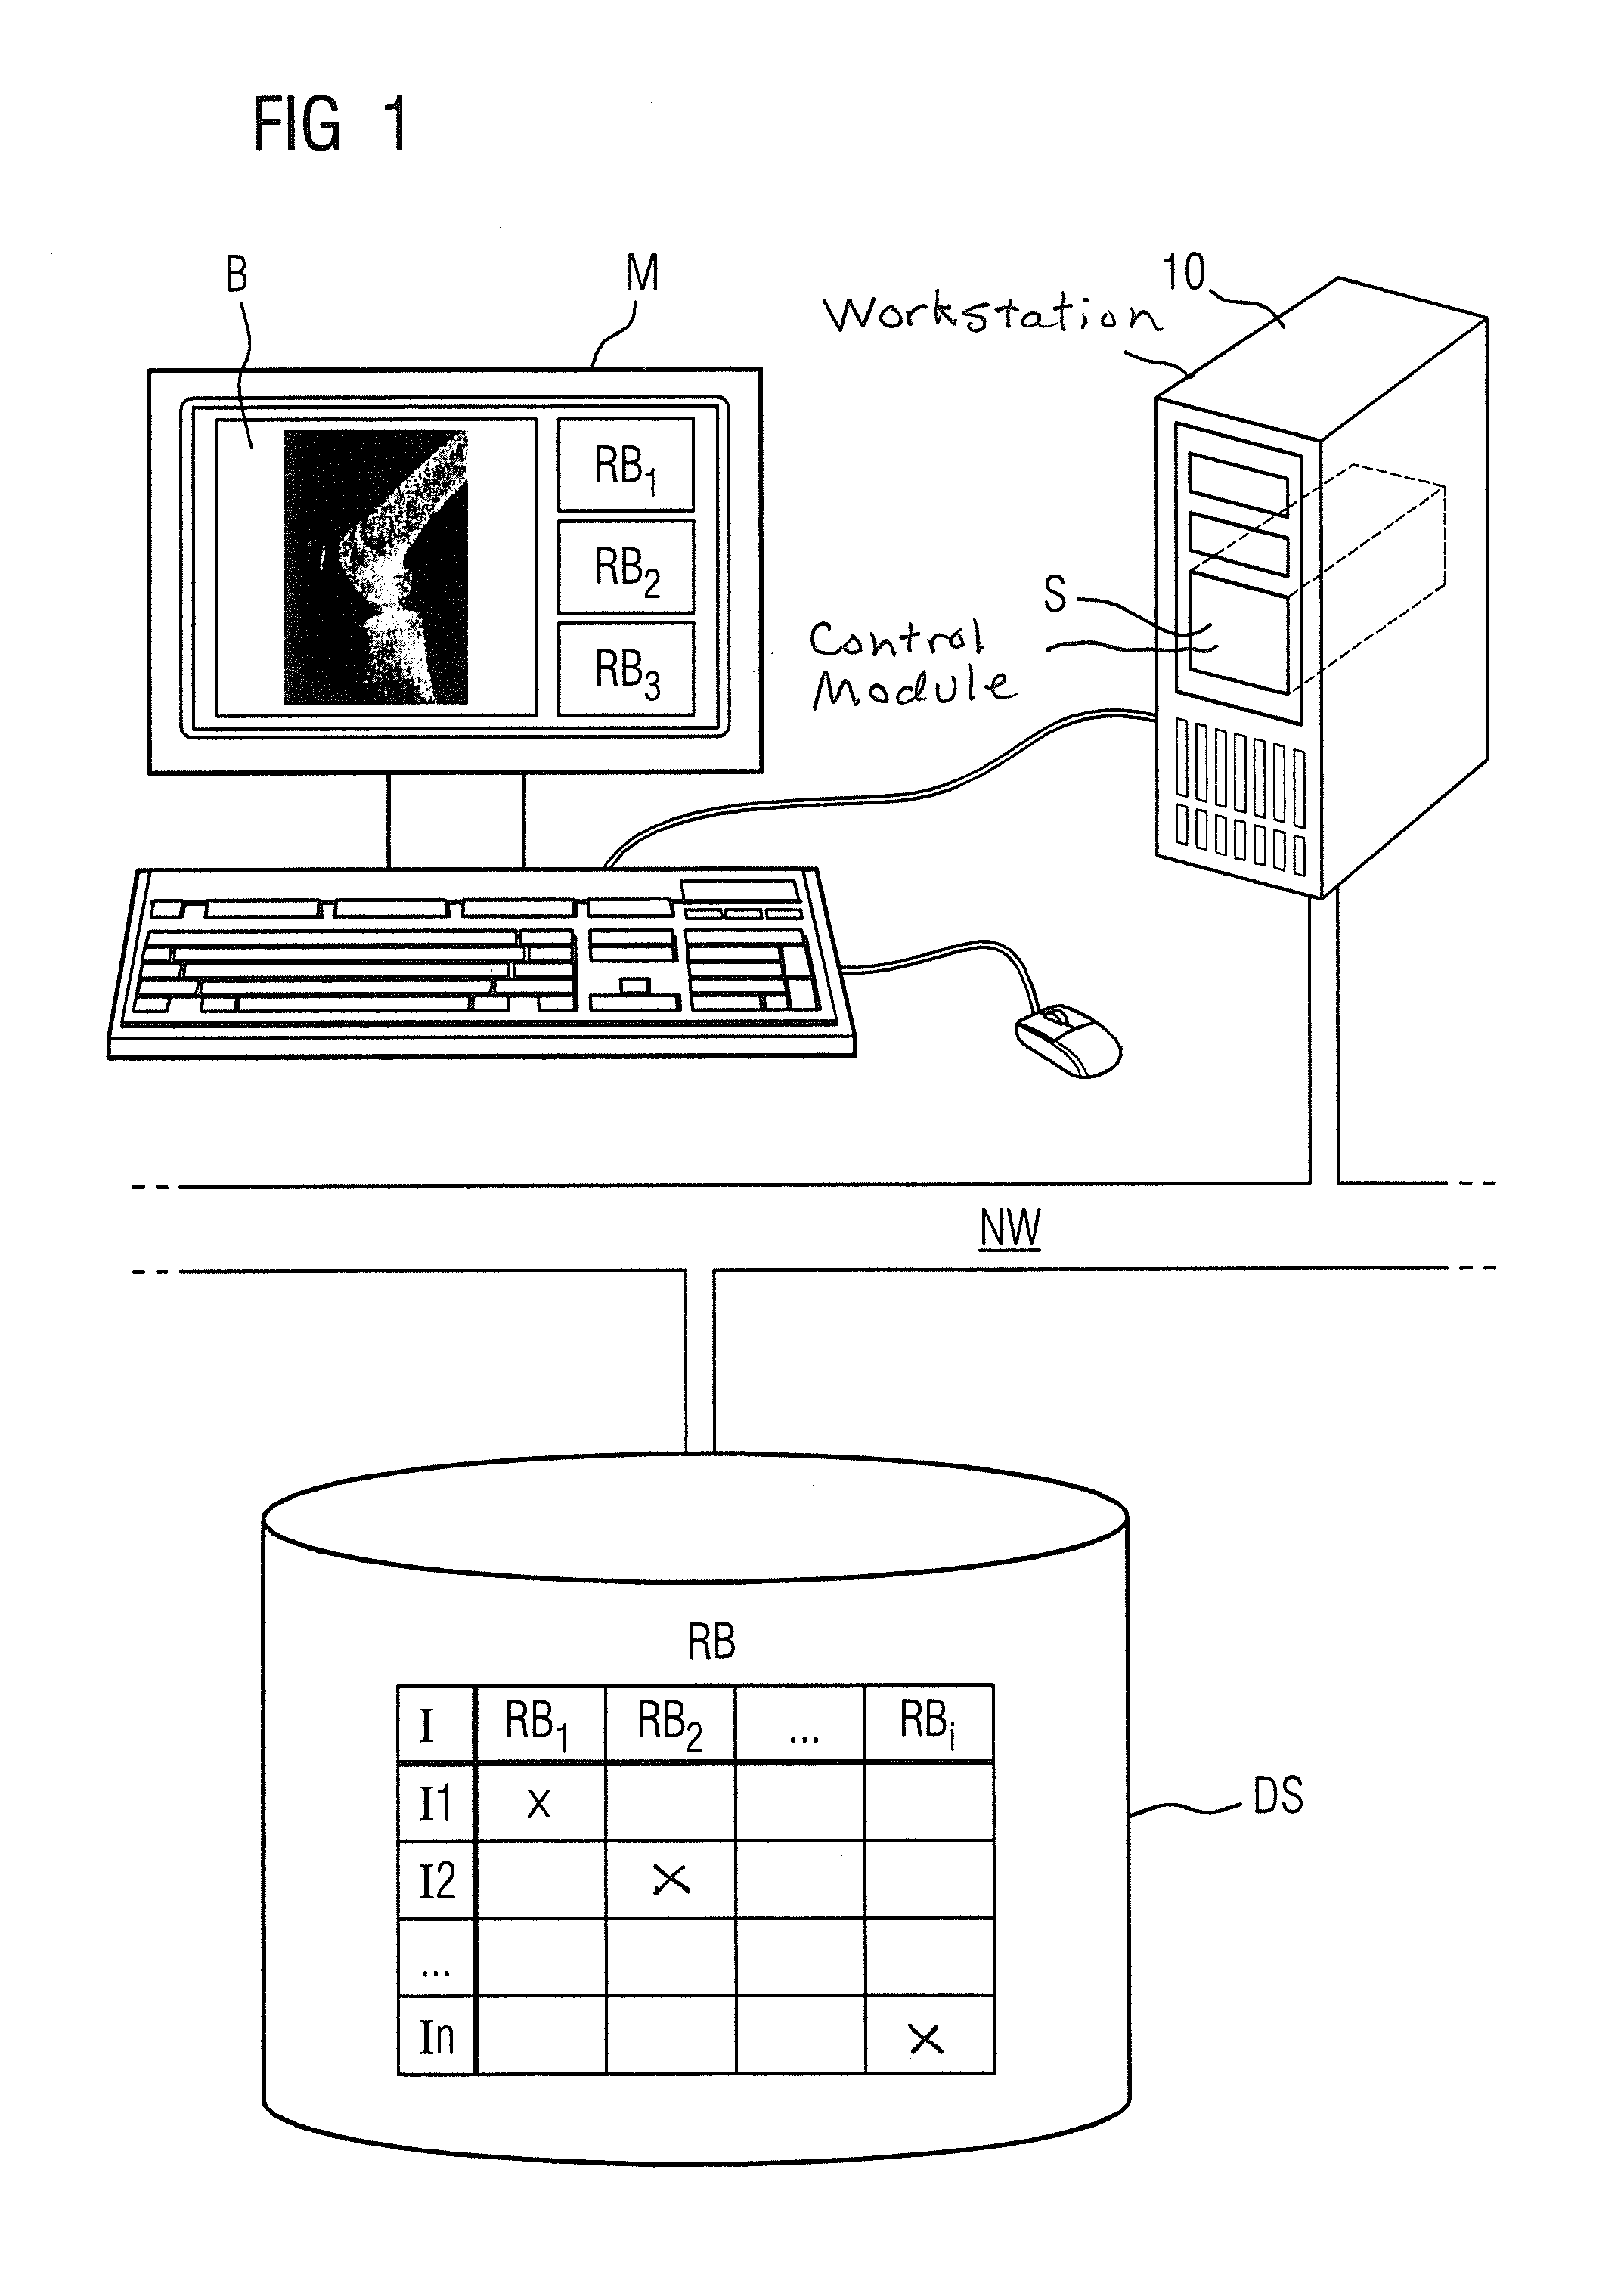 Structured, image-assisted finding generation